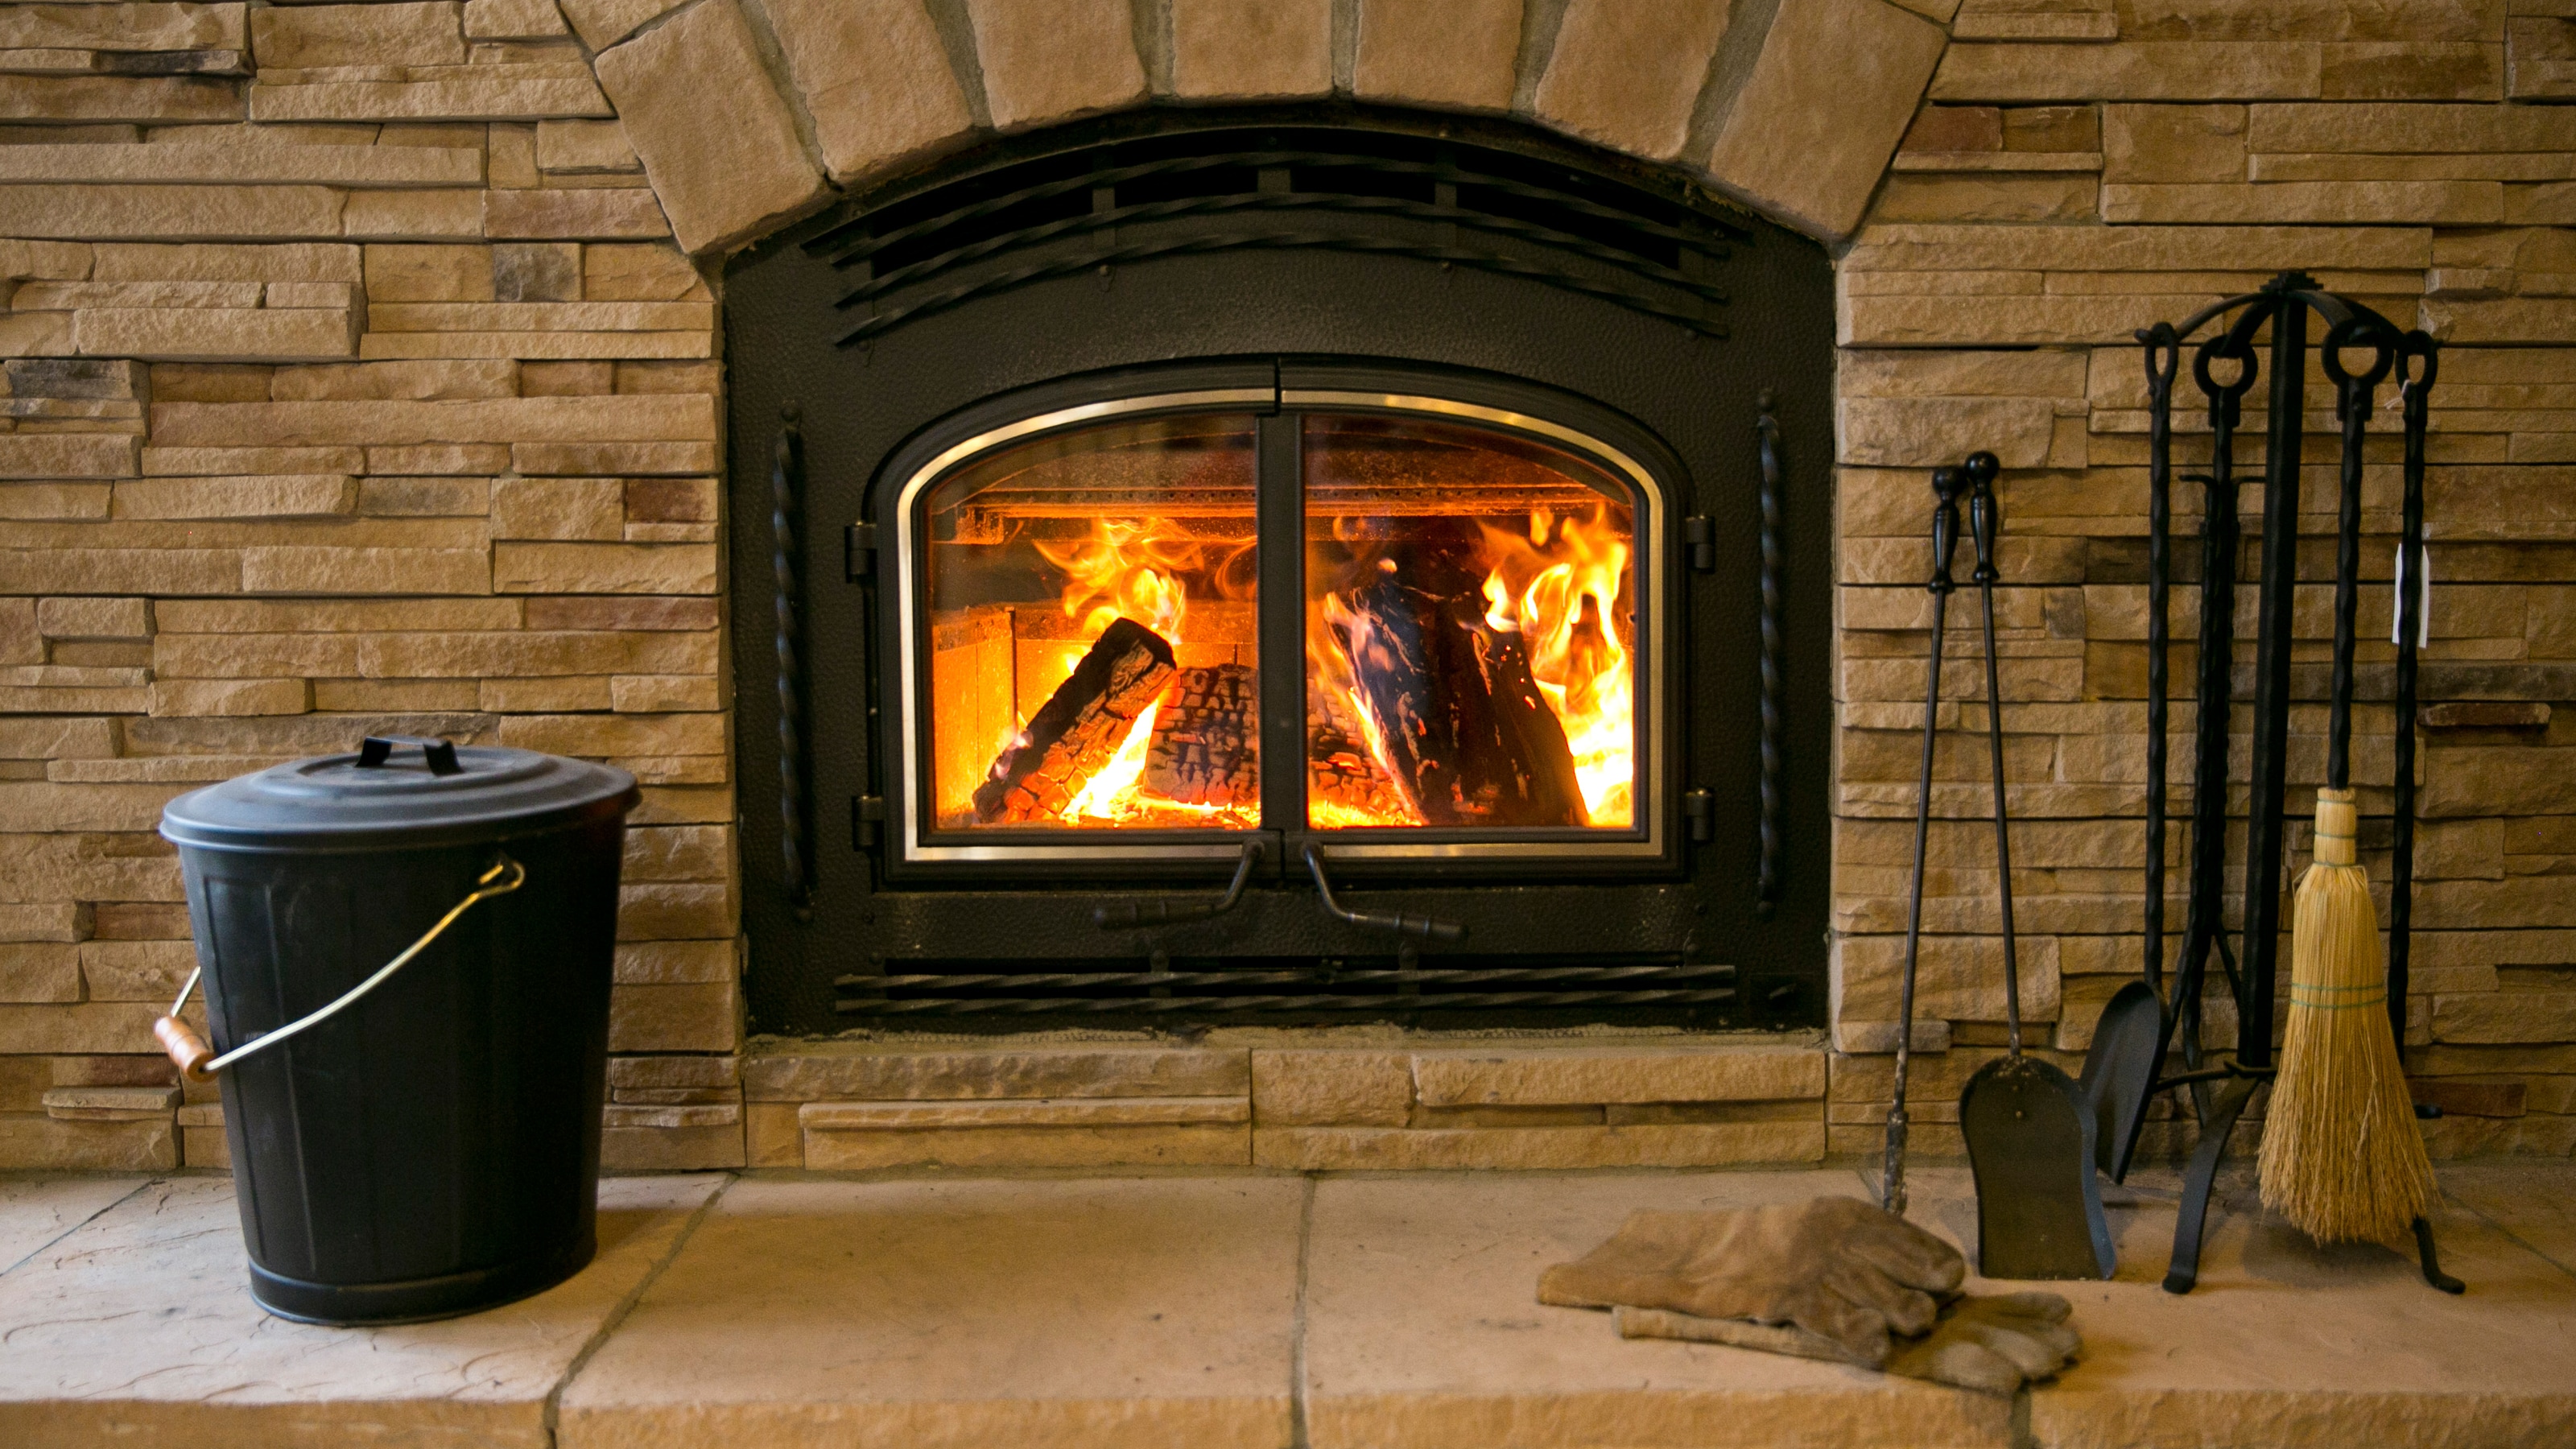 Heat N Glo Fireplace Turns On and Off Awesome How to Convert A Gas Fireplace to Wood Burning